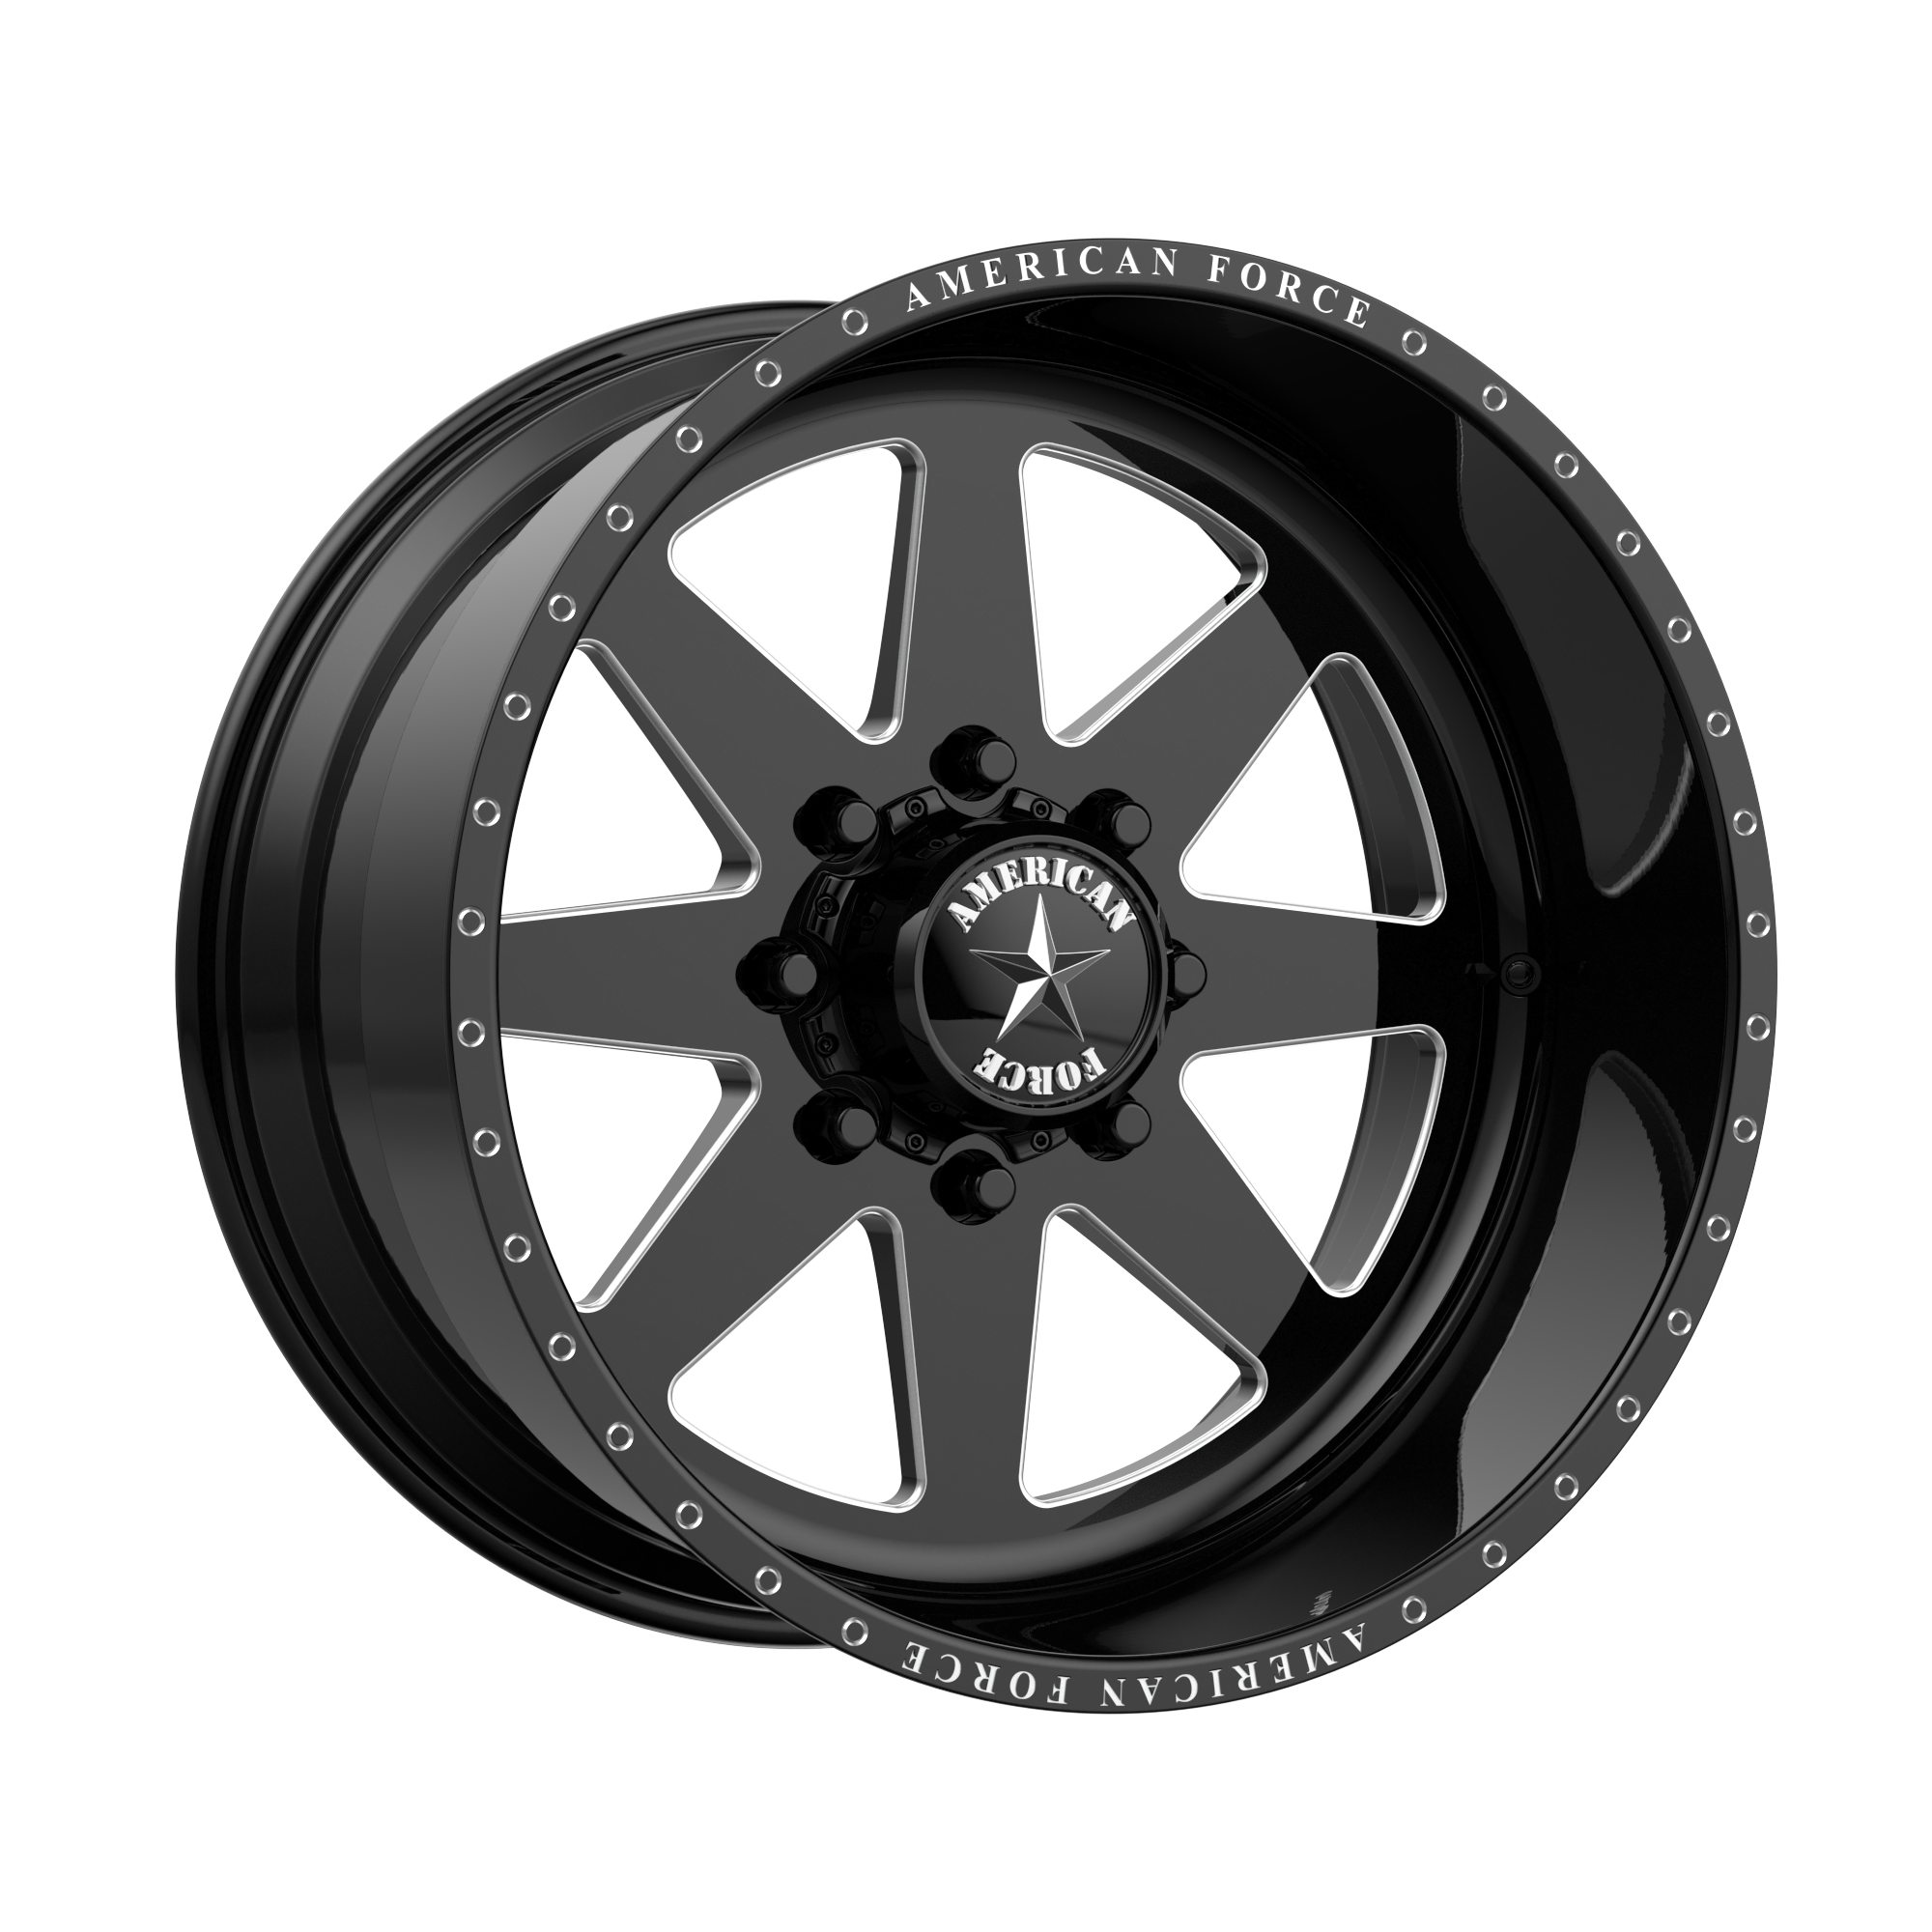 INDEPENDENCE SS 20x12 8x170.00 GLOSS BLACK MACHINED (-40 mm) - Tires and Engine Performance